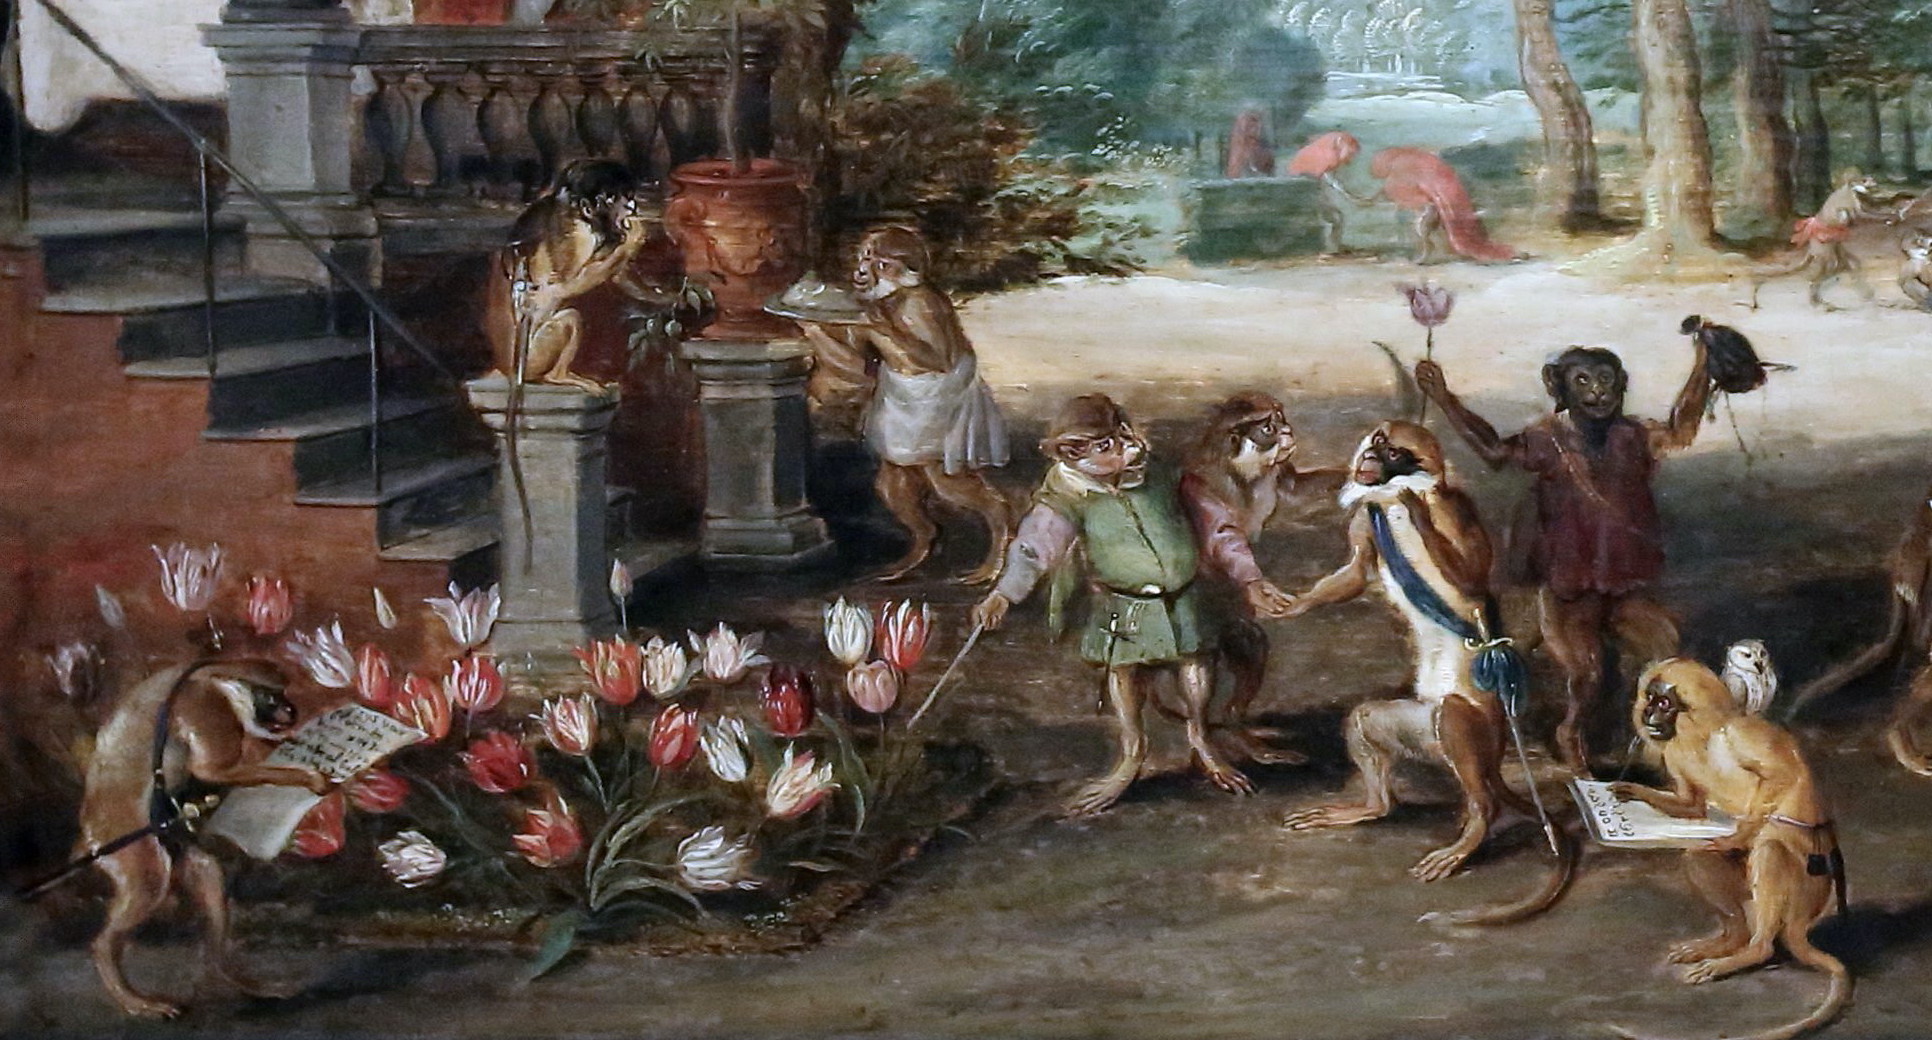 Brueghel suggests the economic folly of tulip mania by depicting speculators as brainless monkeys in contemporary upper-class dress (detail), Jan Brueghel the Younger, Satire on Tulip Mania, c. 1640, oil on panel, 31 x 49 cm (Frans Hals Museum, Haarlem)